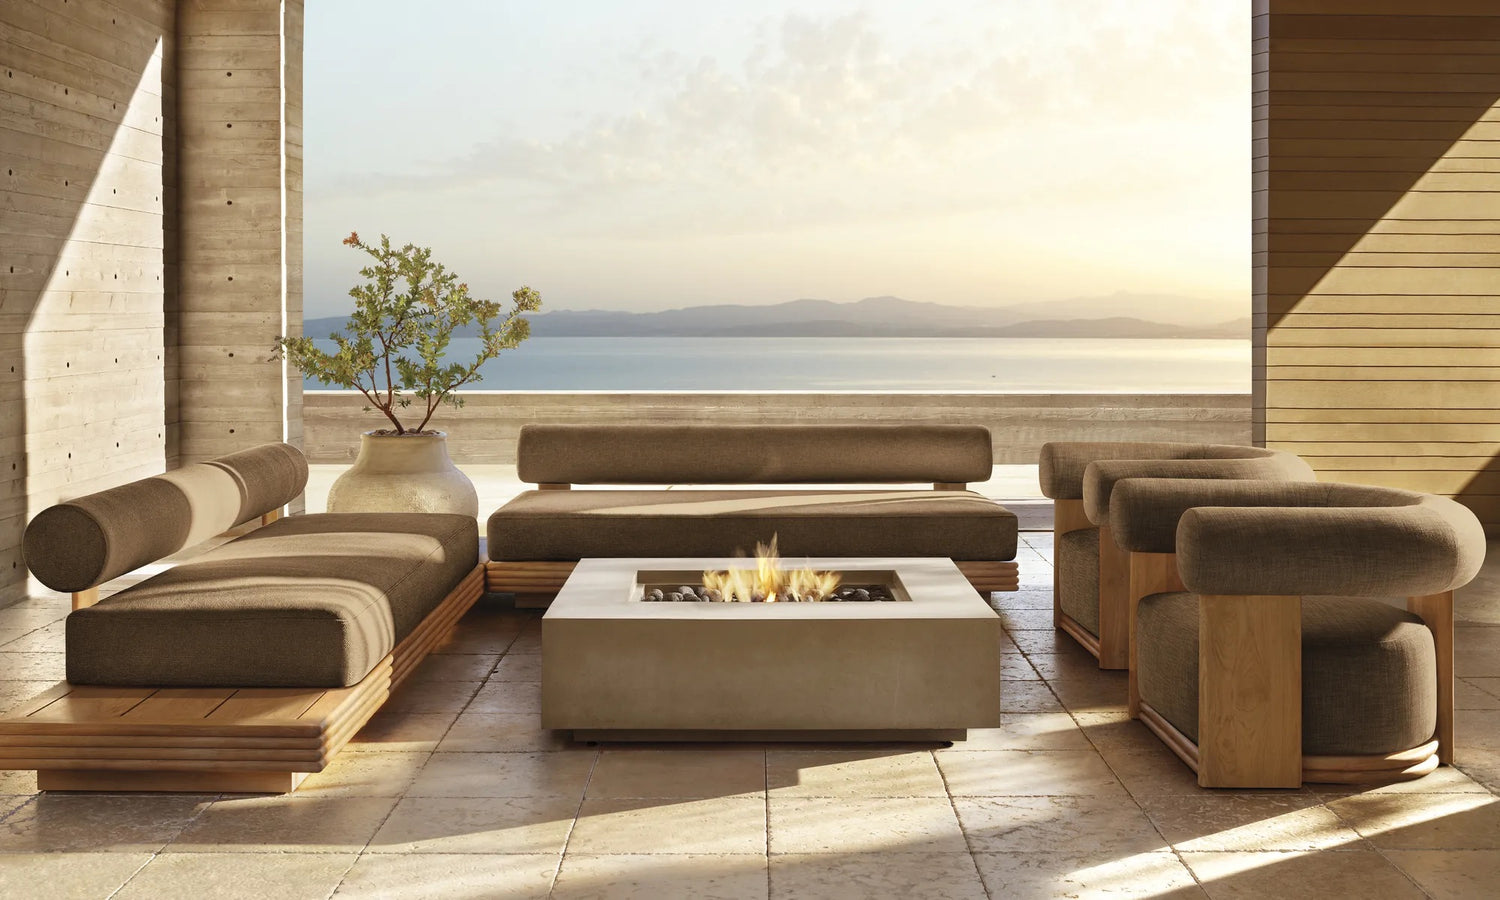 A cozy patio with modern furniture overlooks a serene body of water. The seating arrangement includes cushioned sofas and chairs around a square fire pit. A potted plant adds a touch of greenery, and the setting is bathed in soft, warm light.